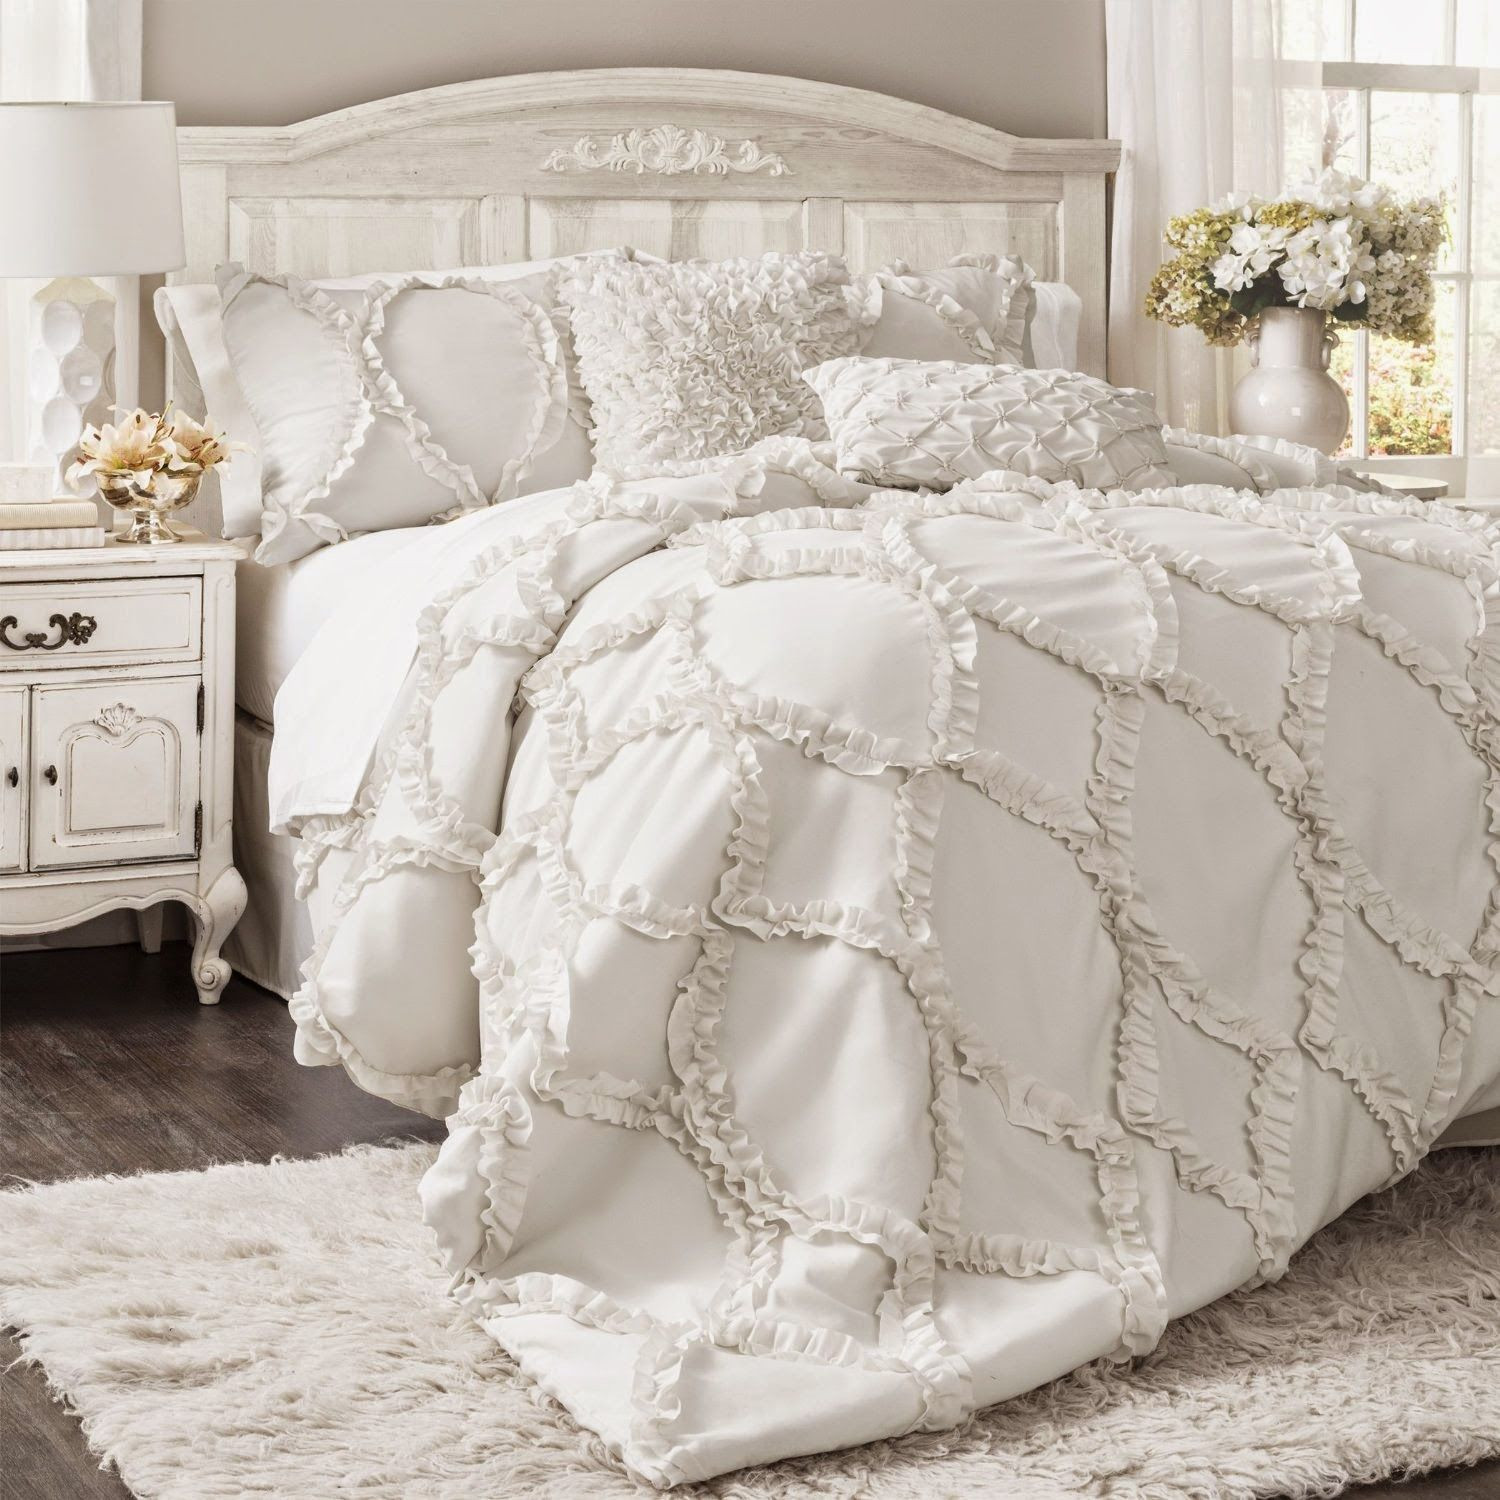 Shabby Chic Bedroom Sets
 13 Bedding Sets That Won t Break The Bud